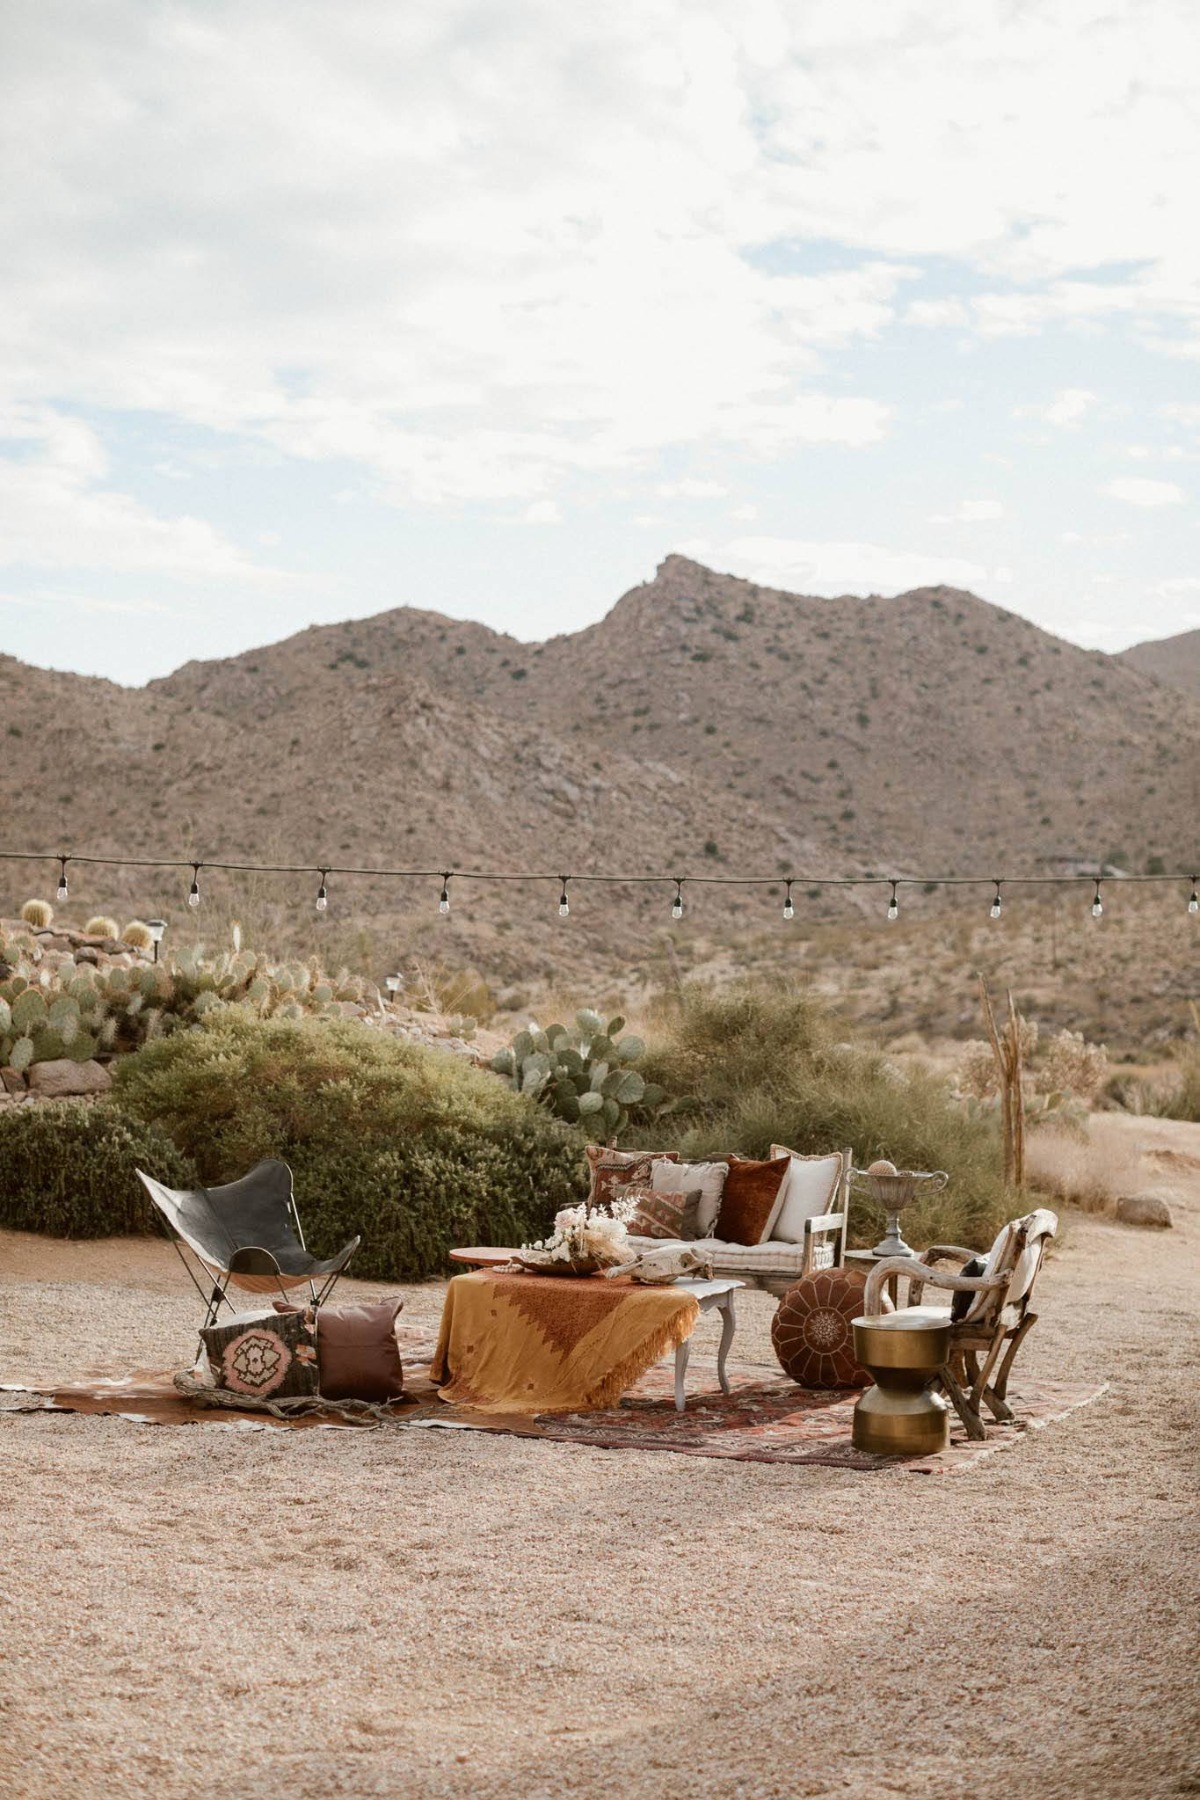 Walking The Line Between Rustic and Refined In Joshua Tree